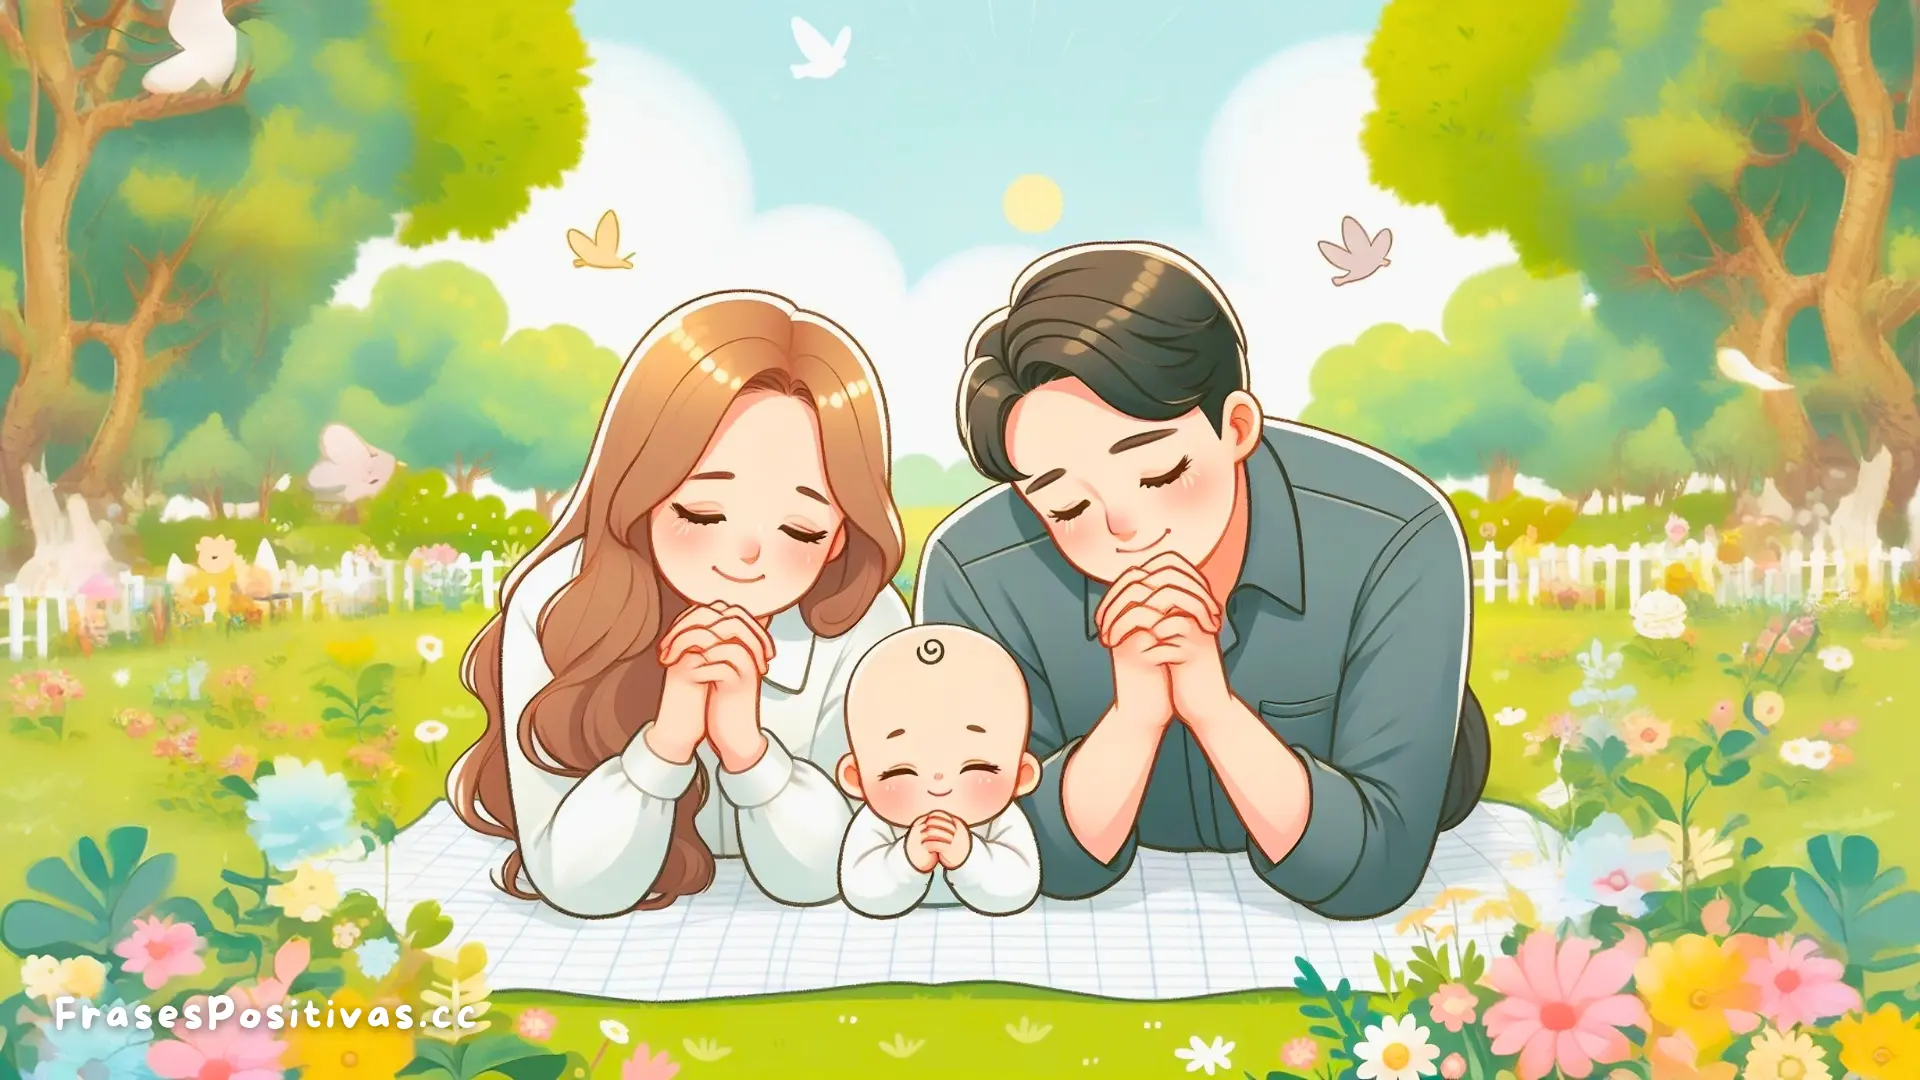 A family of three, with a mother, a father, and a baby, praying together in a park. They are lying on a blanket, looking at the sky, and thanking God for their blessings. The park is green and sunny, with flowers, trees, and birds. The image has a cute and realistic style, with soft light and natural colors.